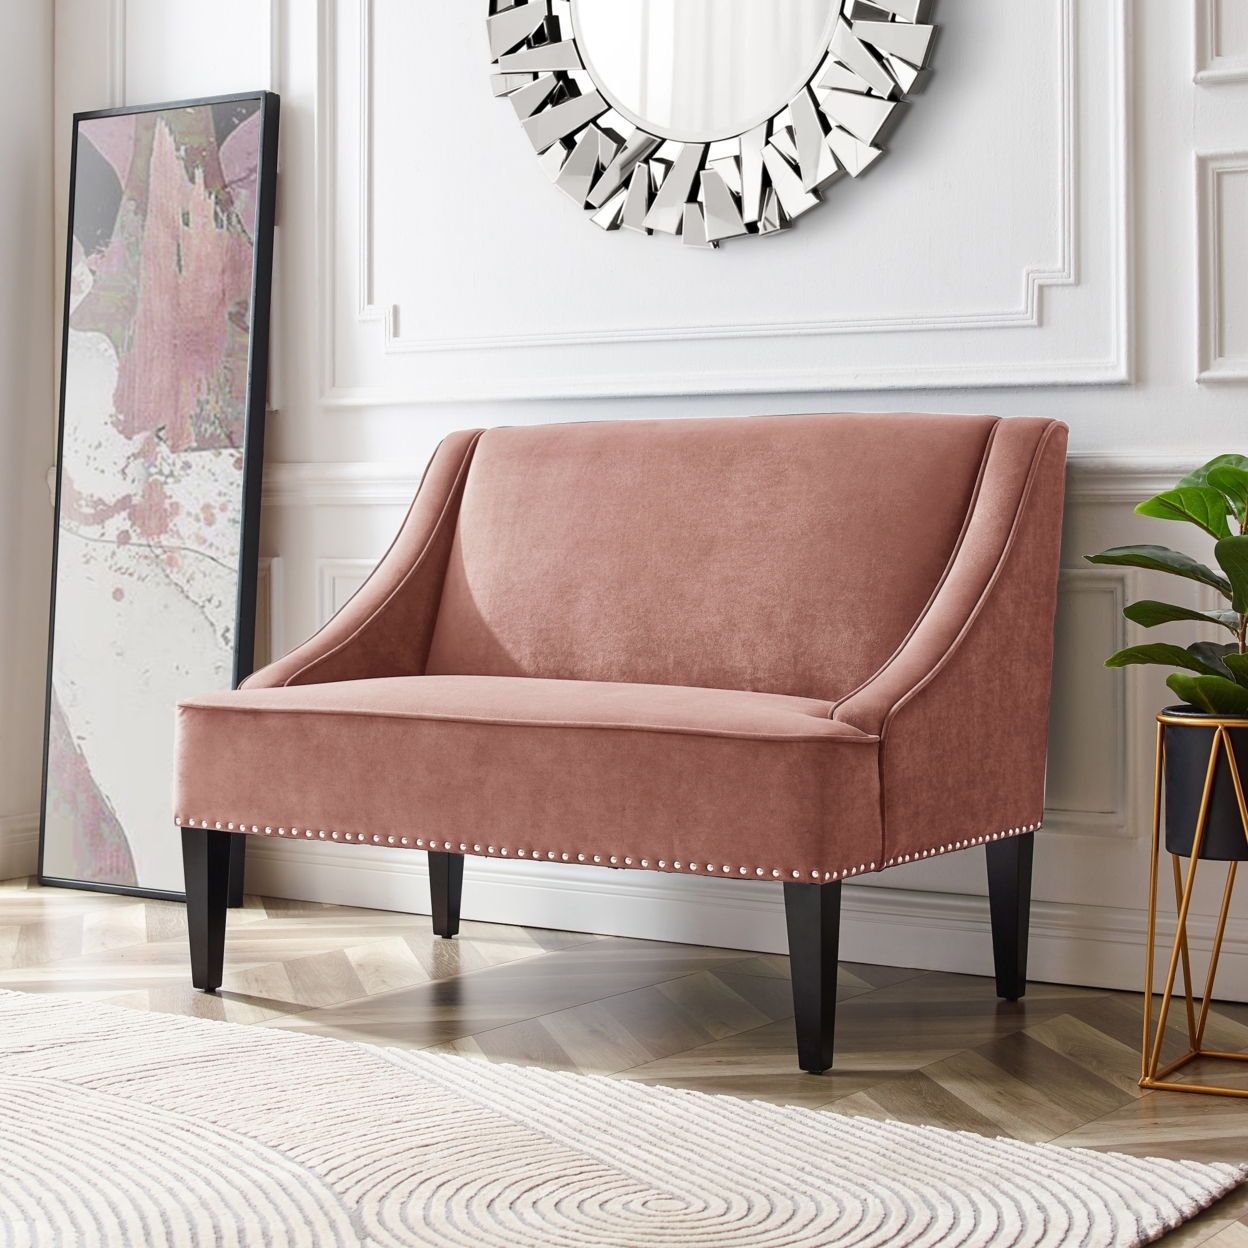 Janessa Velvet Bench - Upholstered With Swoop Arms - Blush